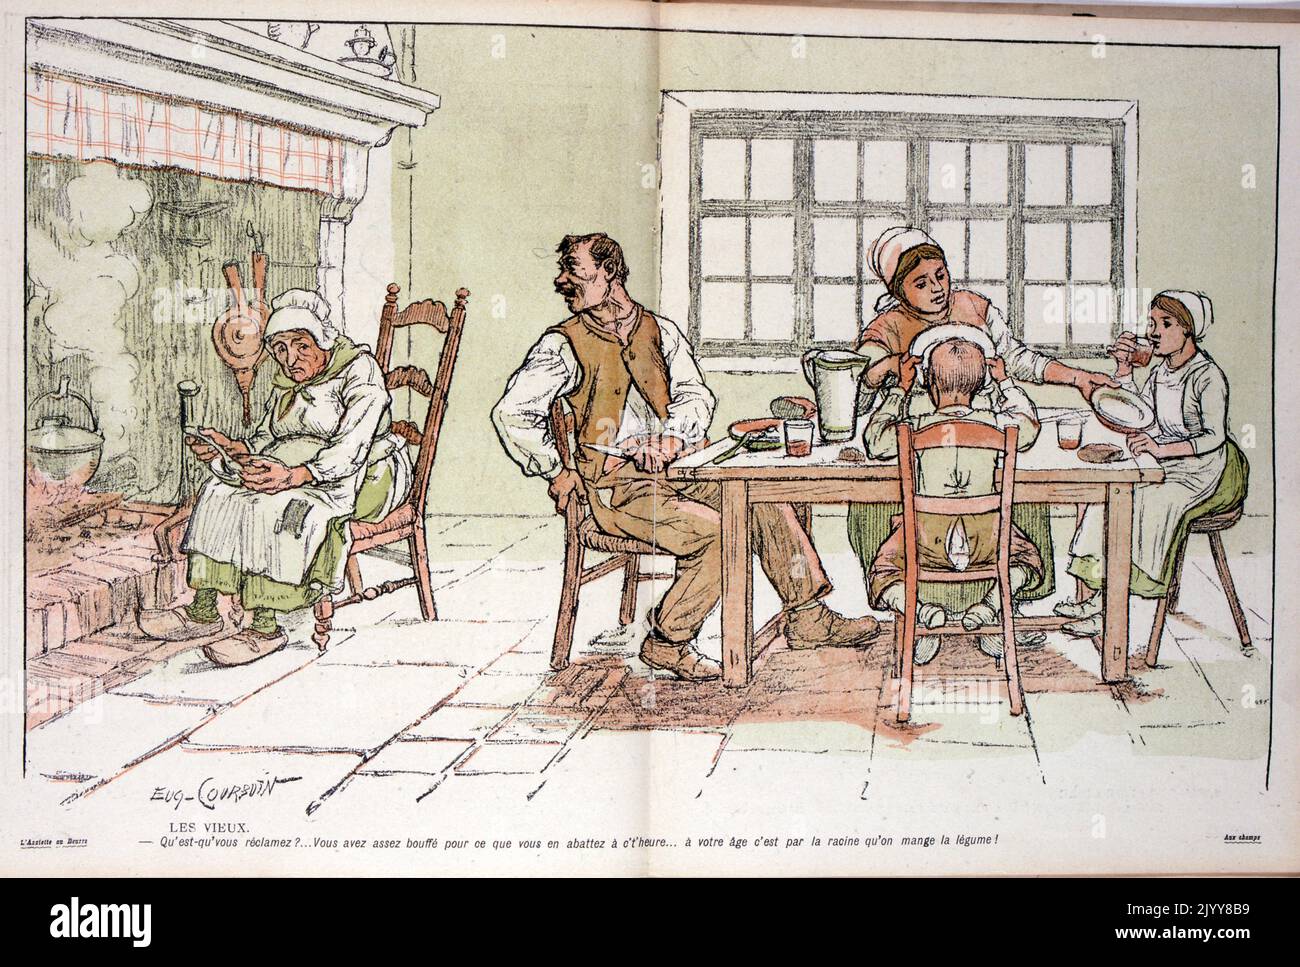 In L'Assiette au Beurre satirical magazine; colour drawing of a family around a table in a simple house. A man tells the old lady that she shouldn't be asking for too much at her age. Entitled 'Old Age'. Stock Photo